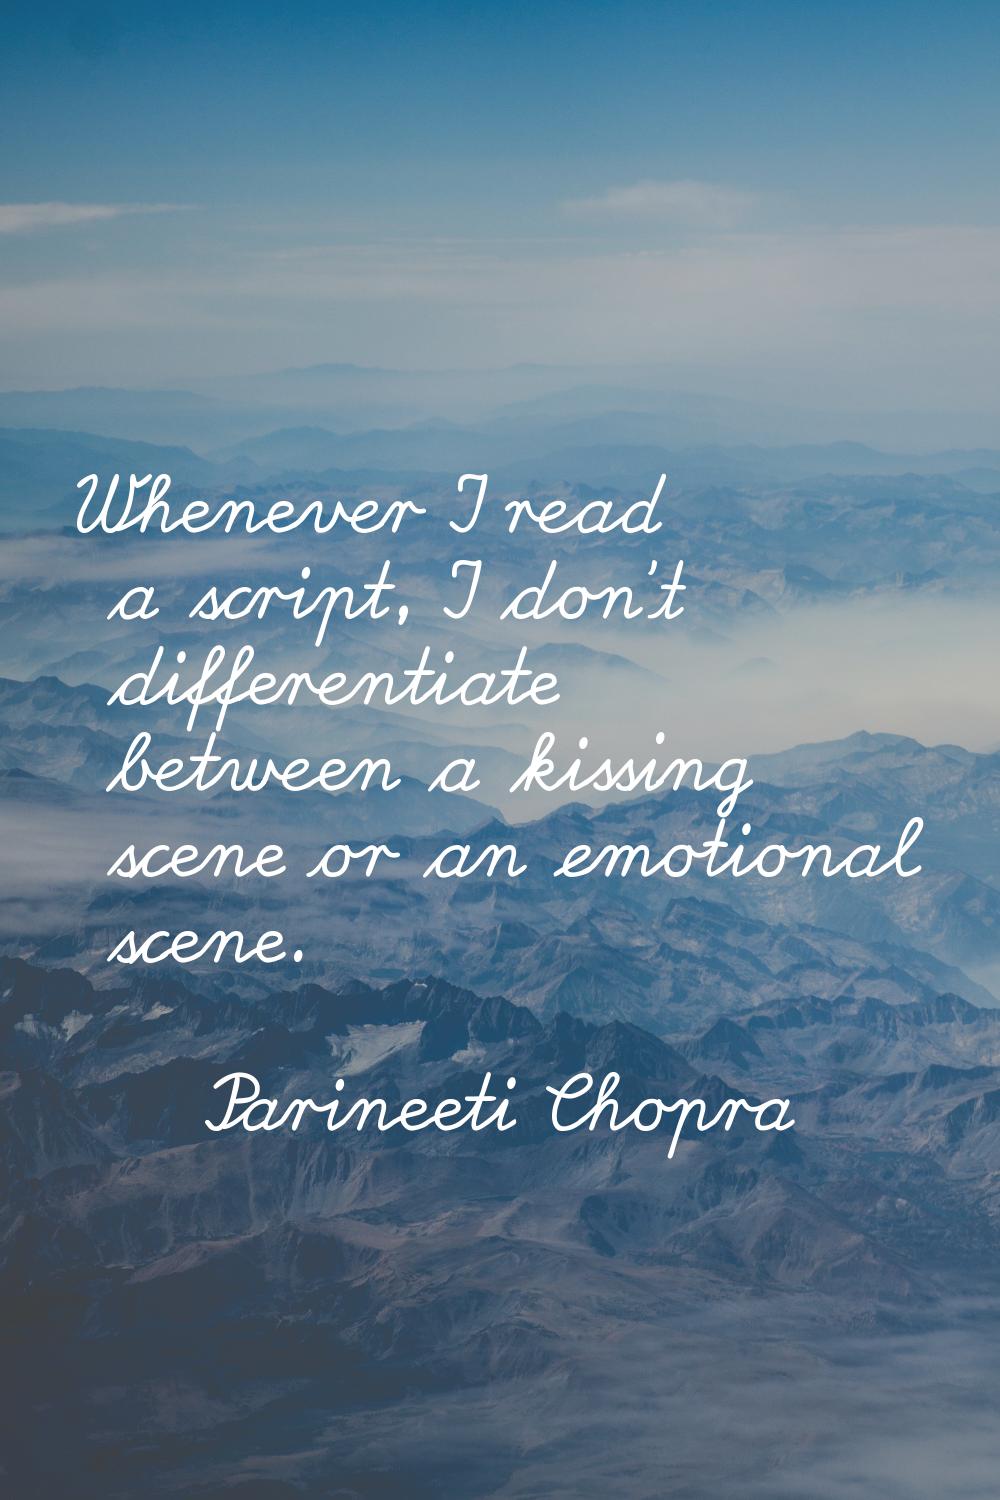 Whenever I read a script, I don't differentiate between a kissing scene or an emotional scene.